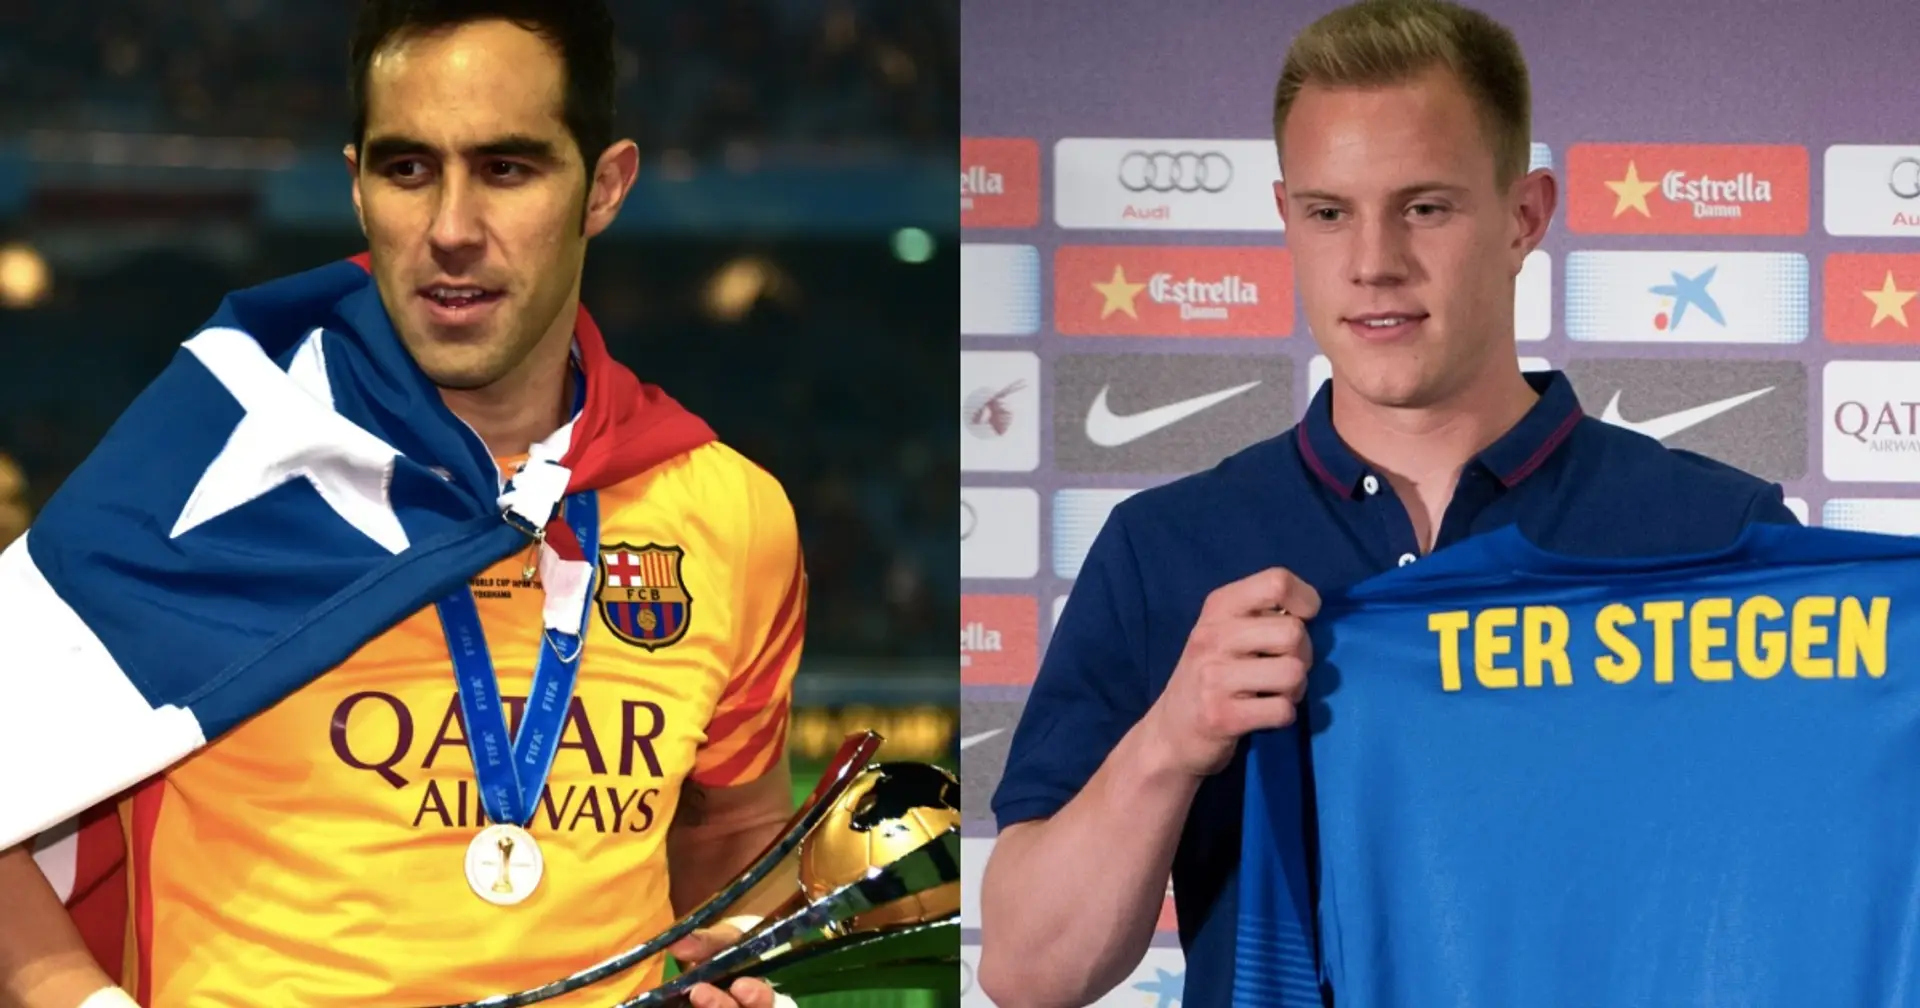 Did Ter Stegen really force Claudio Bravo out of Barcelona?